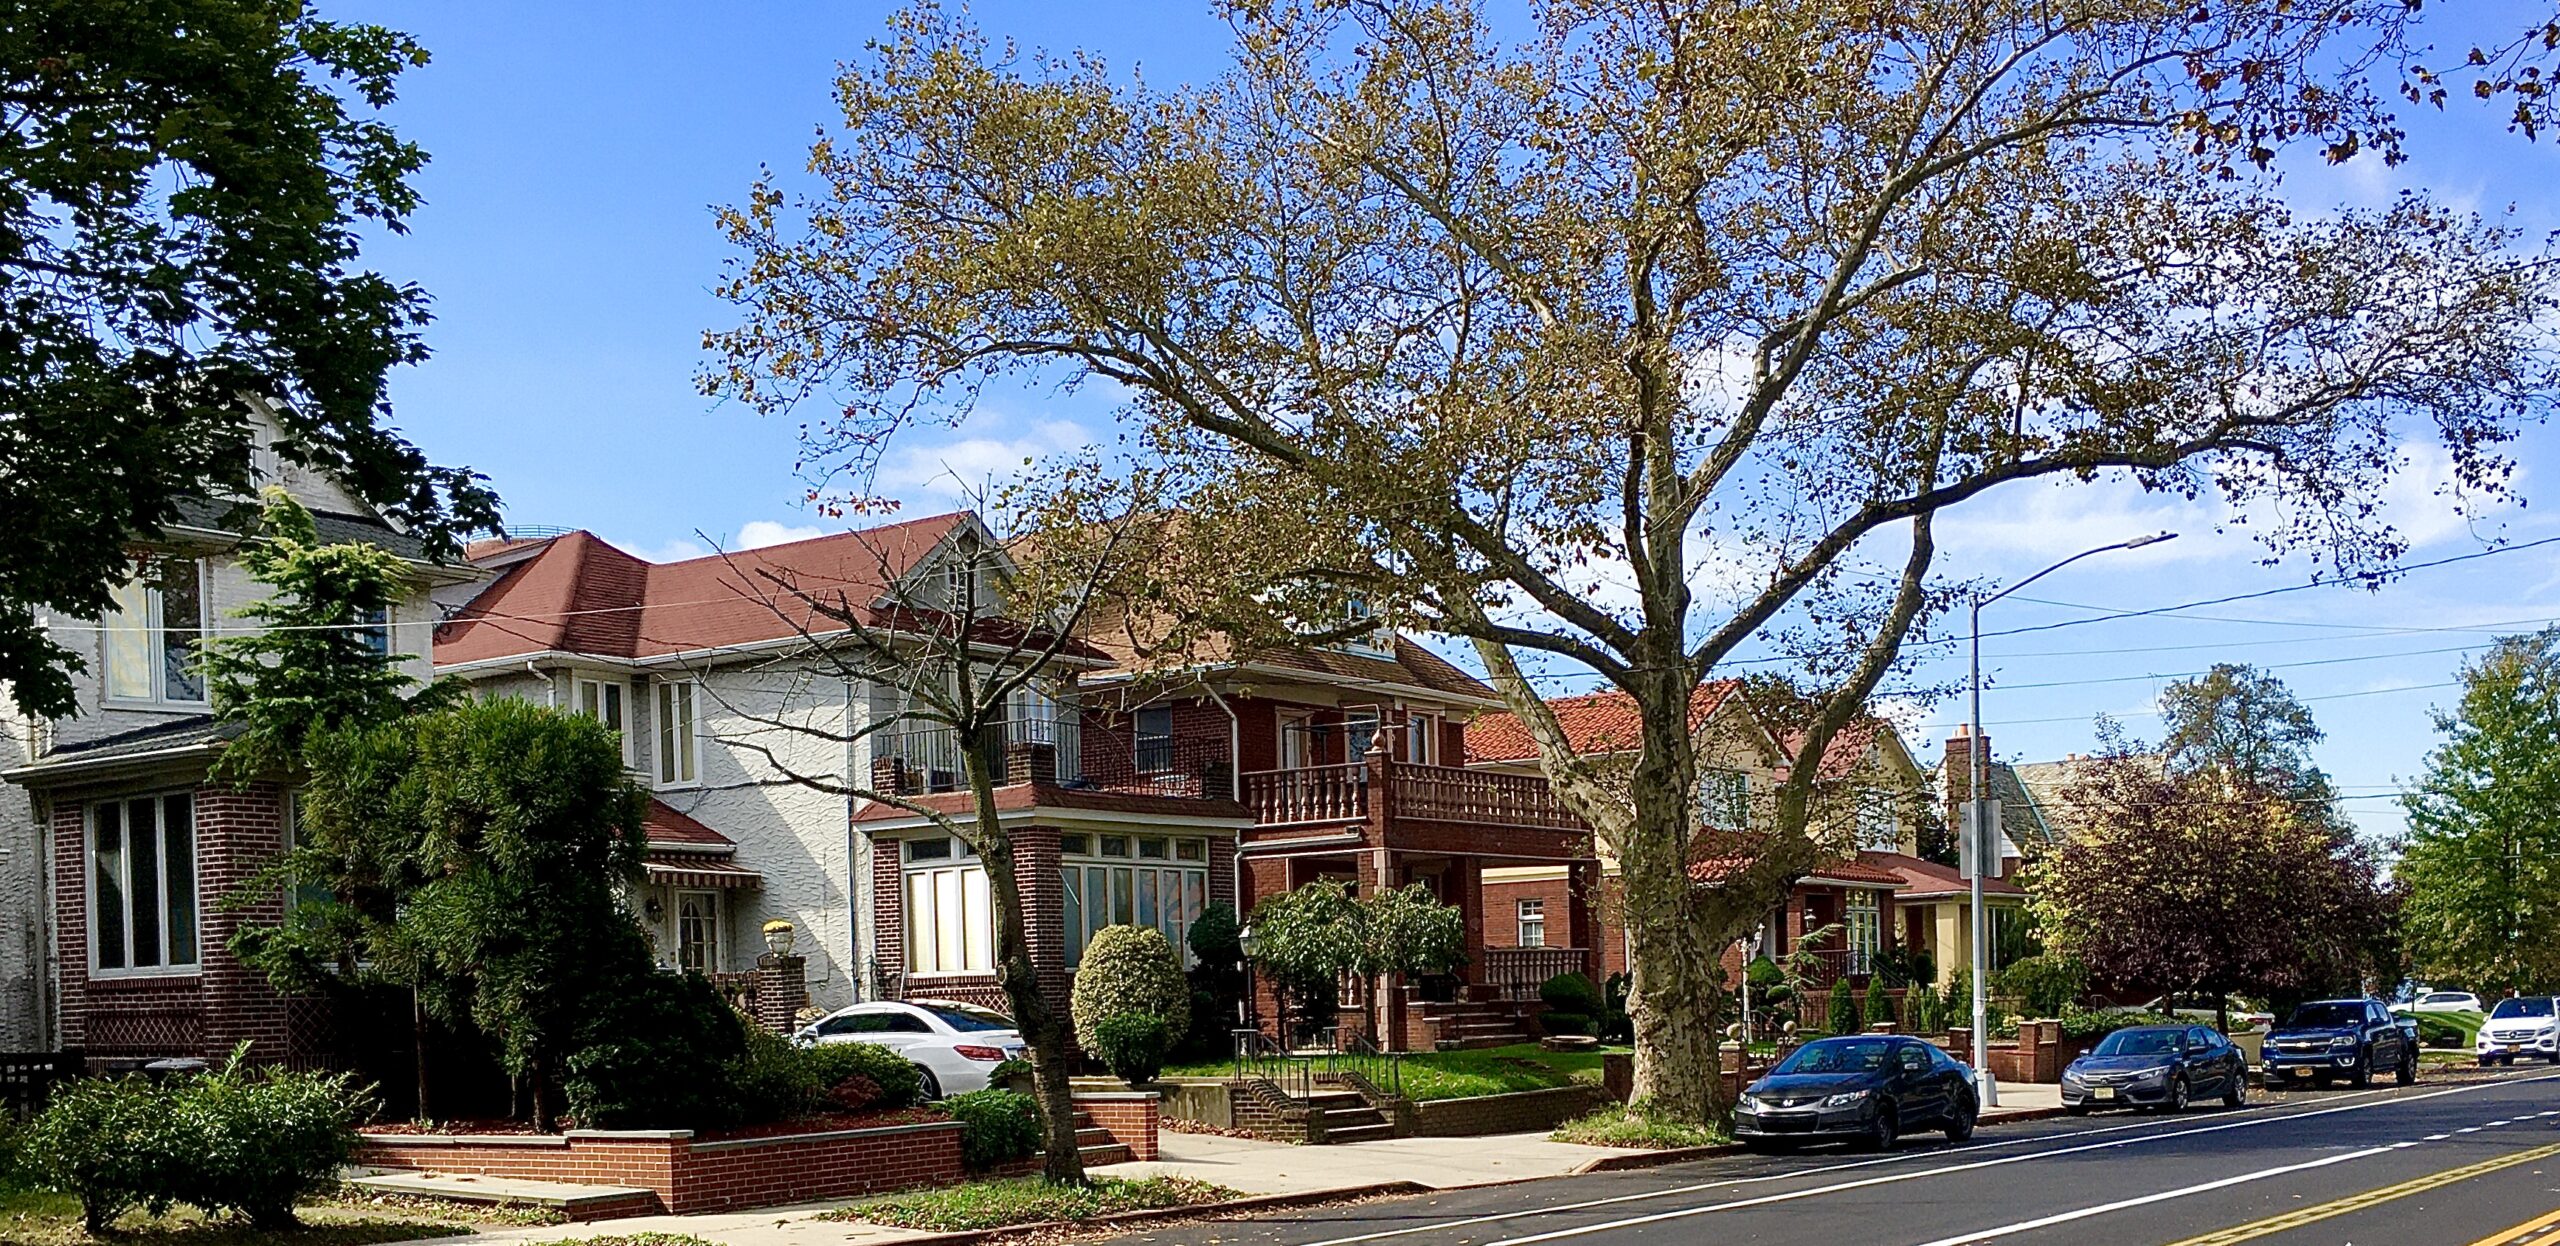 Suburban-style houses line the 86th Street block between Shore Road and Narrows Avenue. Eagle photo by Lore Croghan